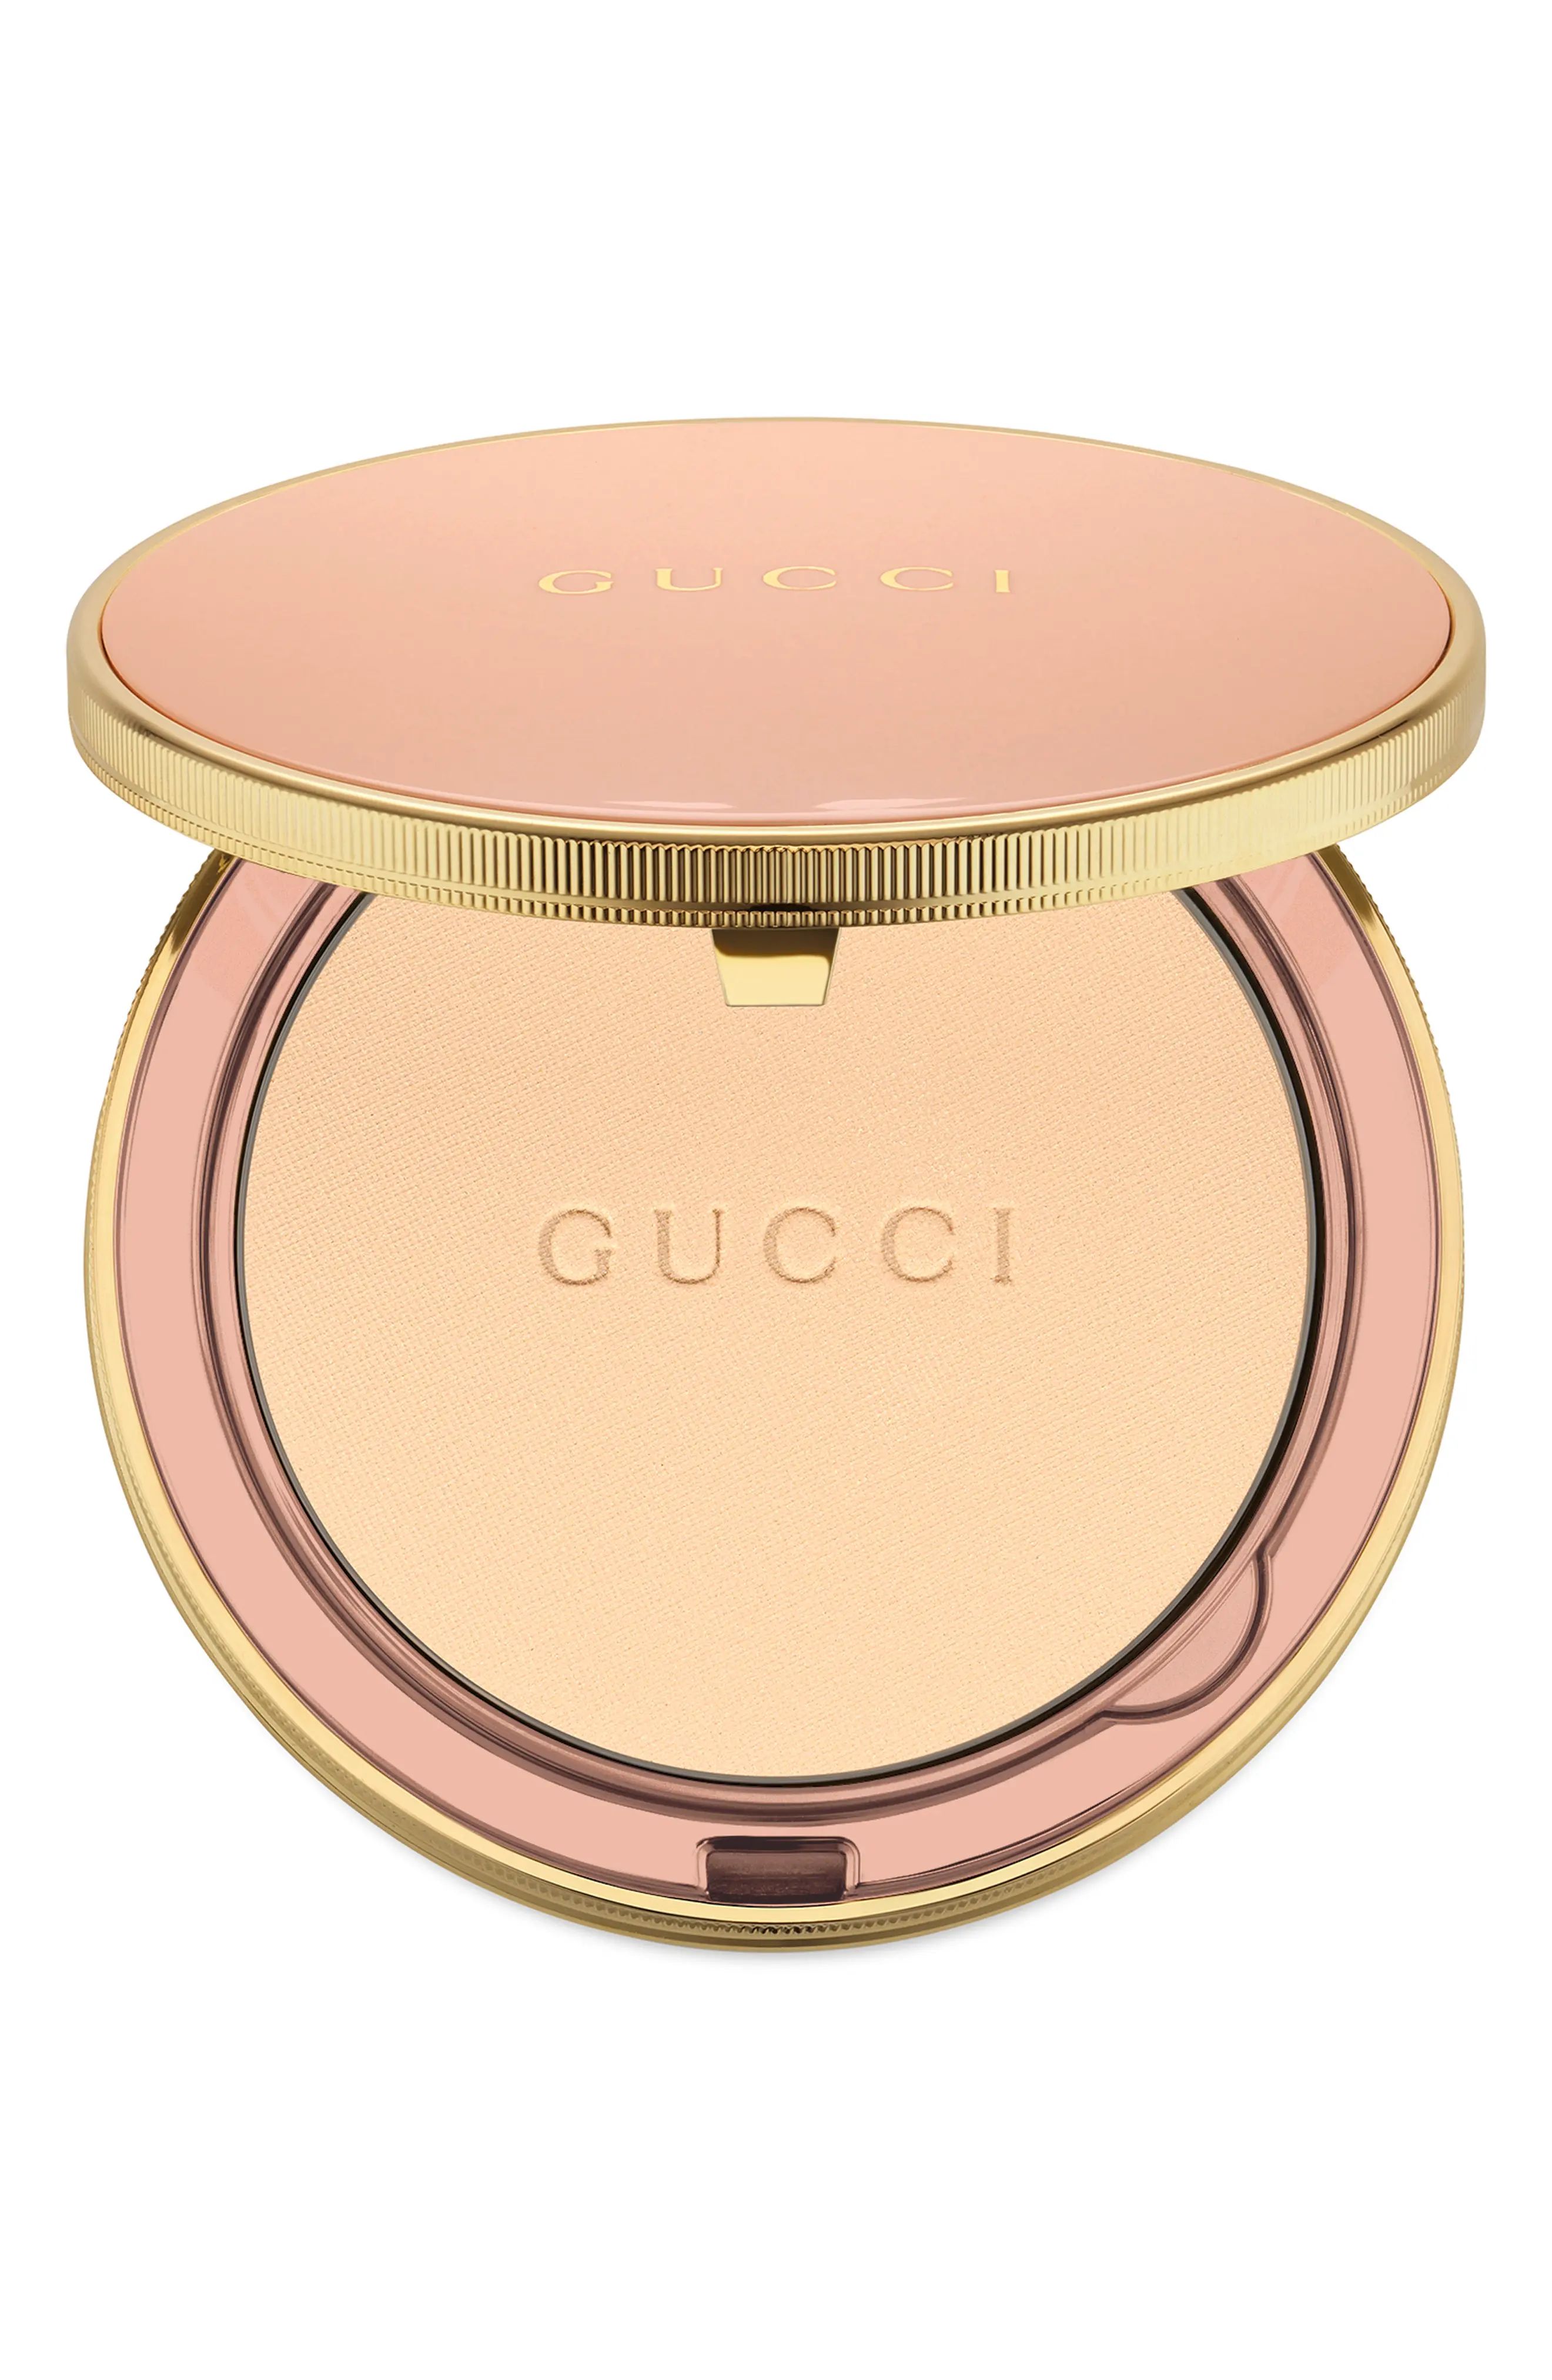 Gucci Poudre De Beaute Mattifying Natural Beauty Setting Powder in 1 at Nordstrom | Nordstrom